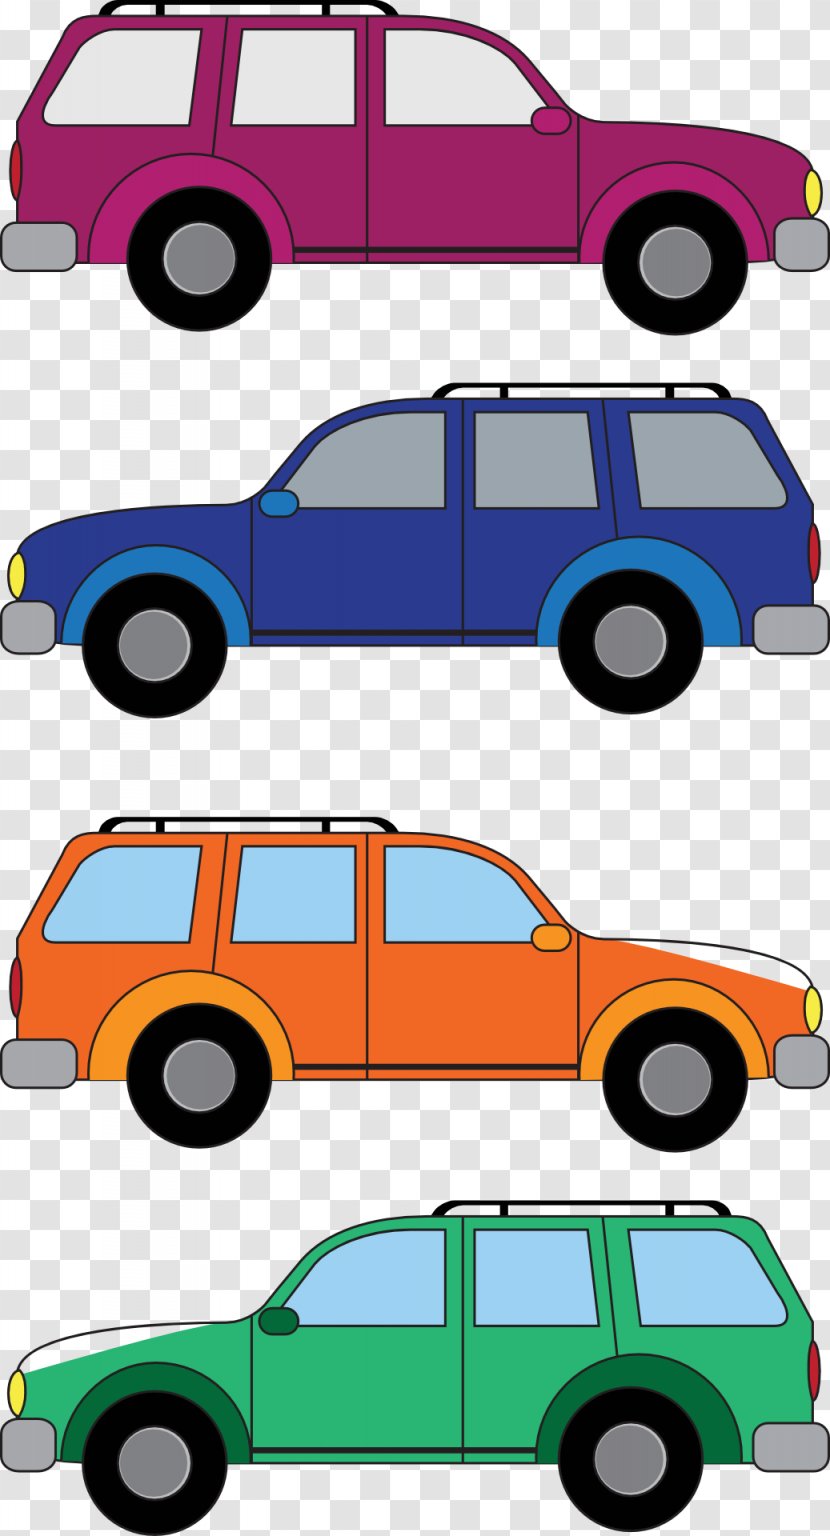 Sport Utility Vehicle Car Pickup Truck Chevrolet Suburban Van - Crossover - Colorful Cars Transparent PNG